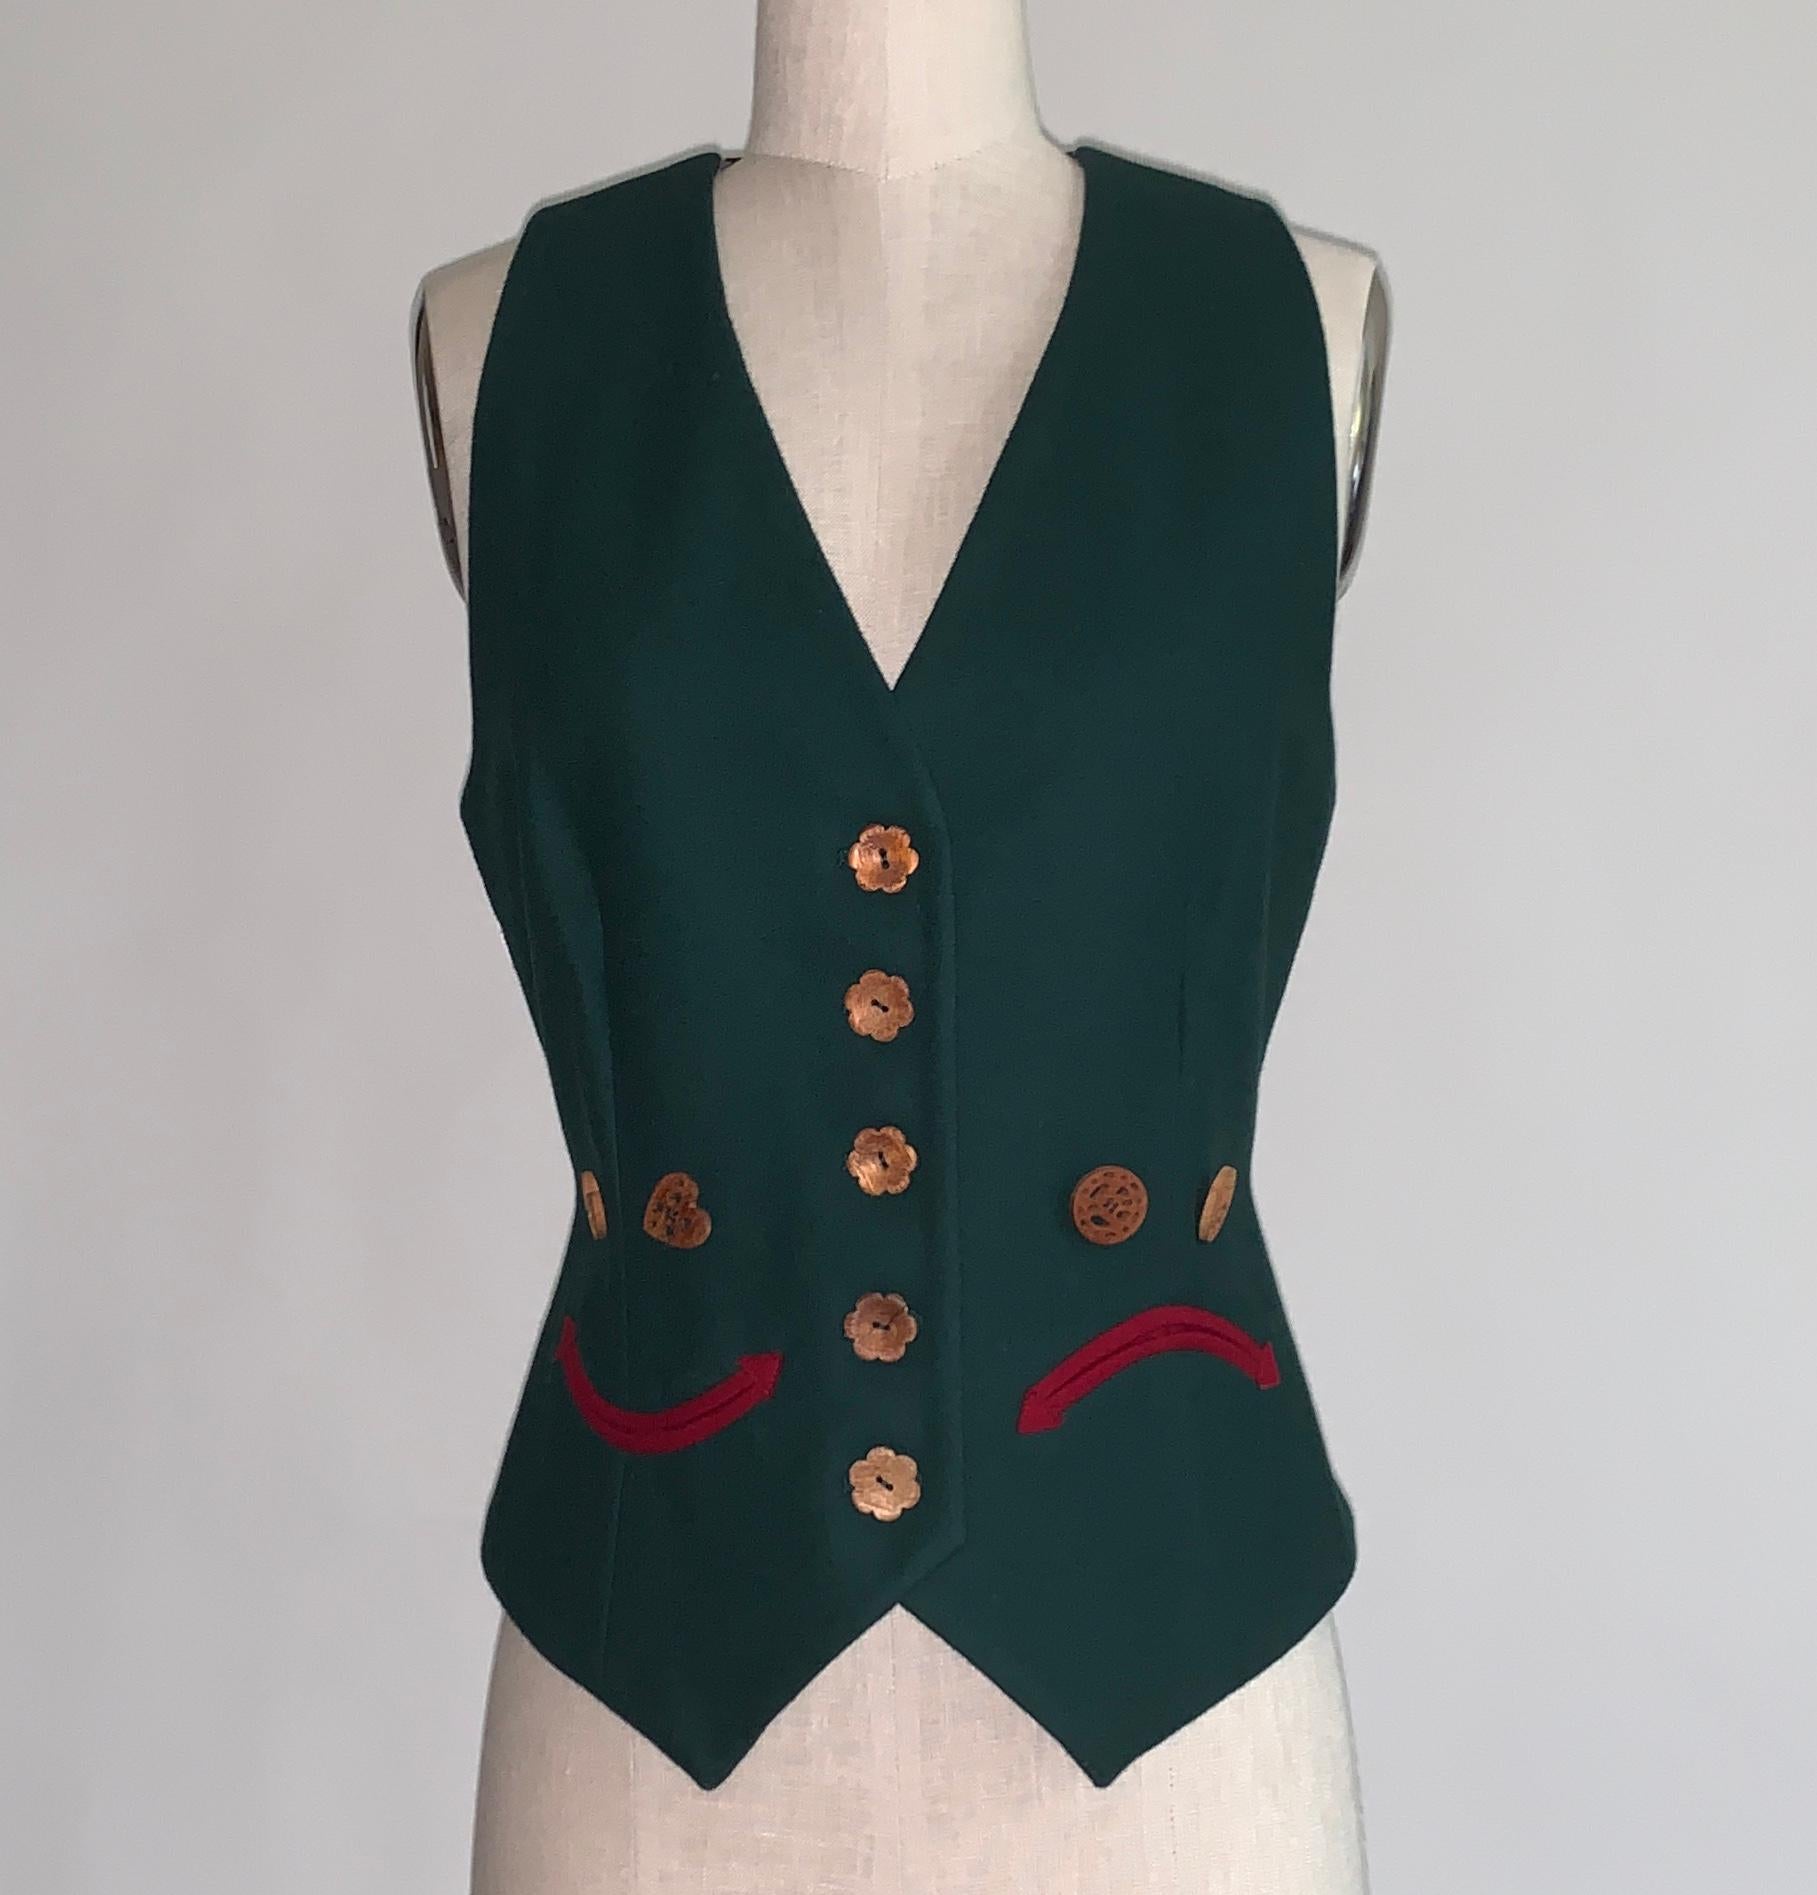 Vintage Moschino Cheap & Chic 1990s green vest featuring a happy face on one side and a sad face on the other. (Moschino was way ahead on emoji style!) Red trim creates the mouths while wooden buttons with cut out details (heart on smiley side,